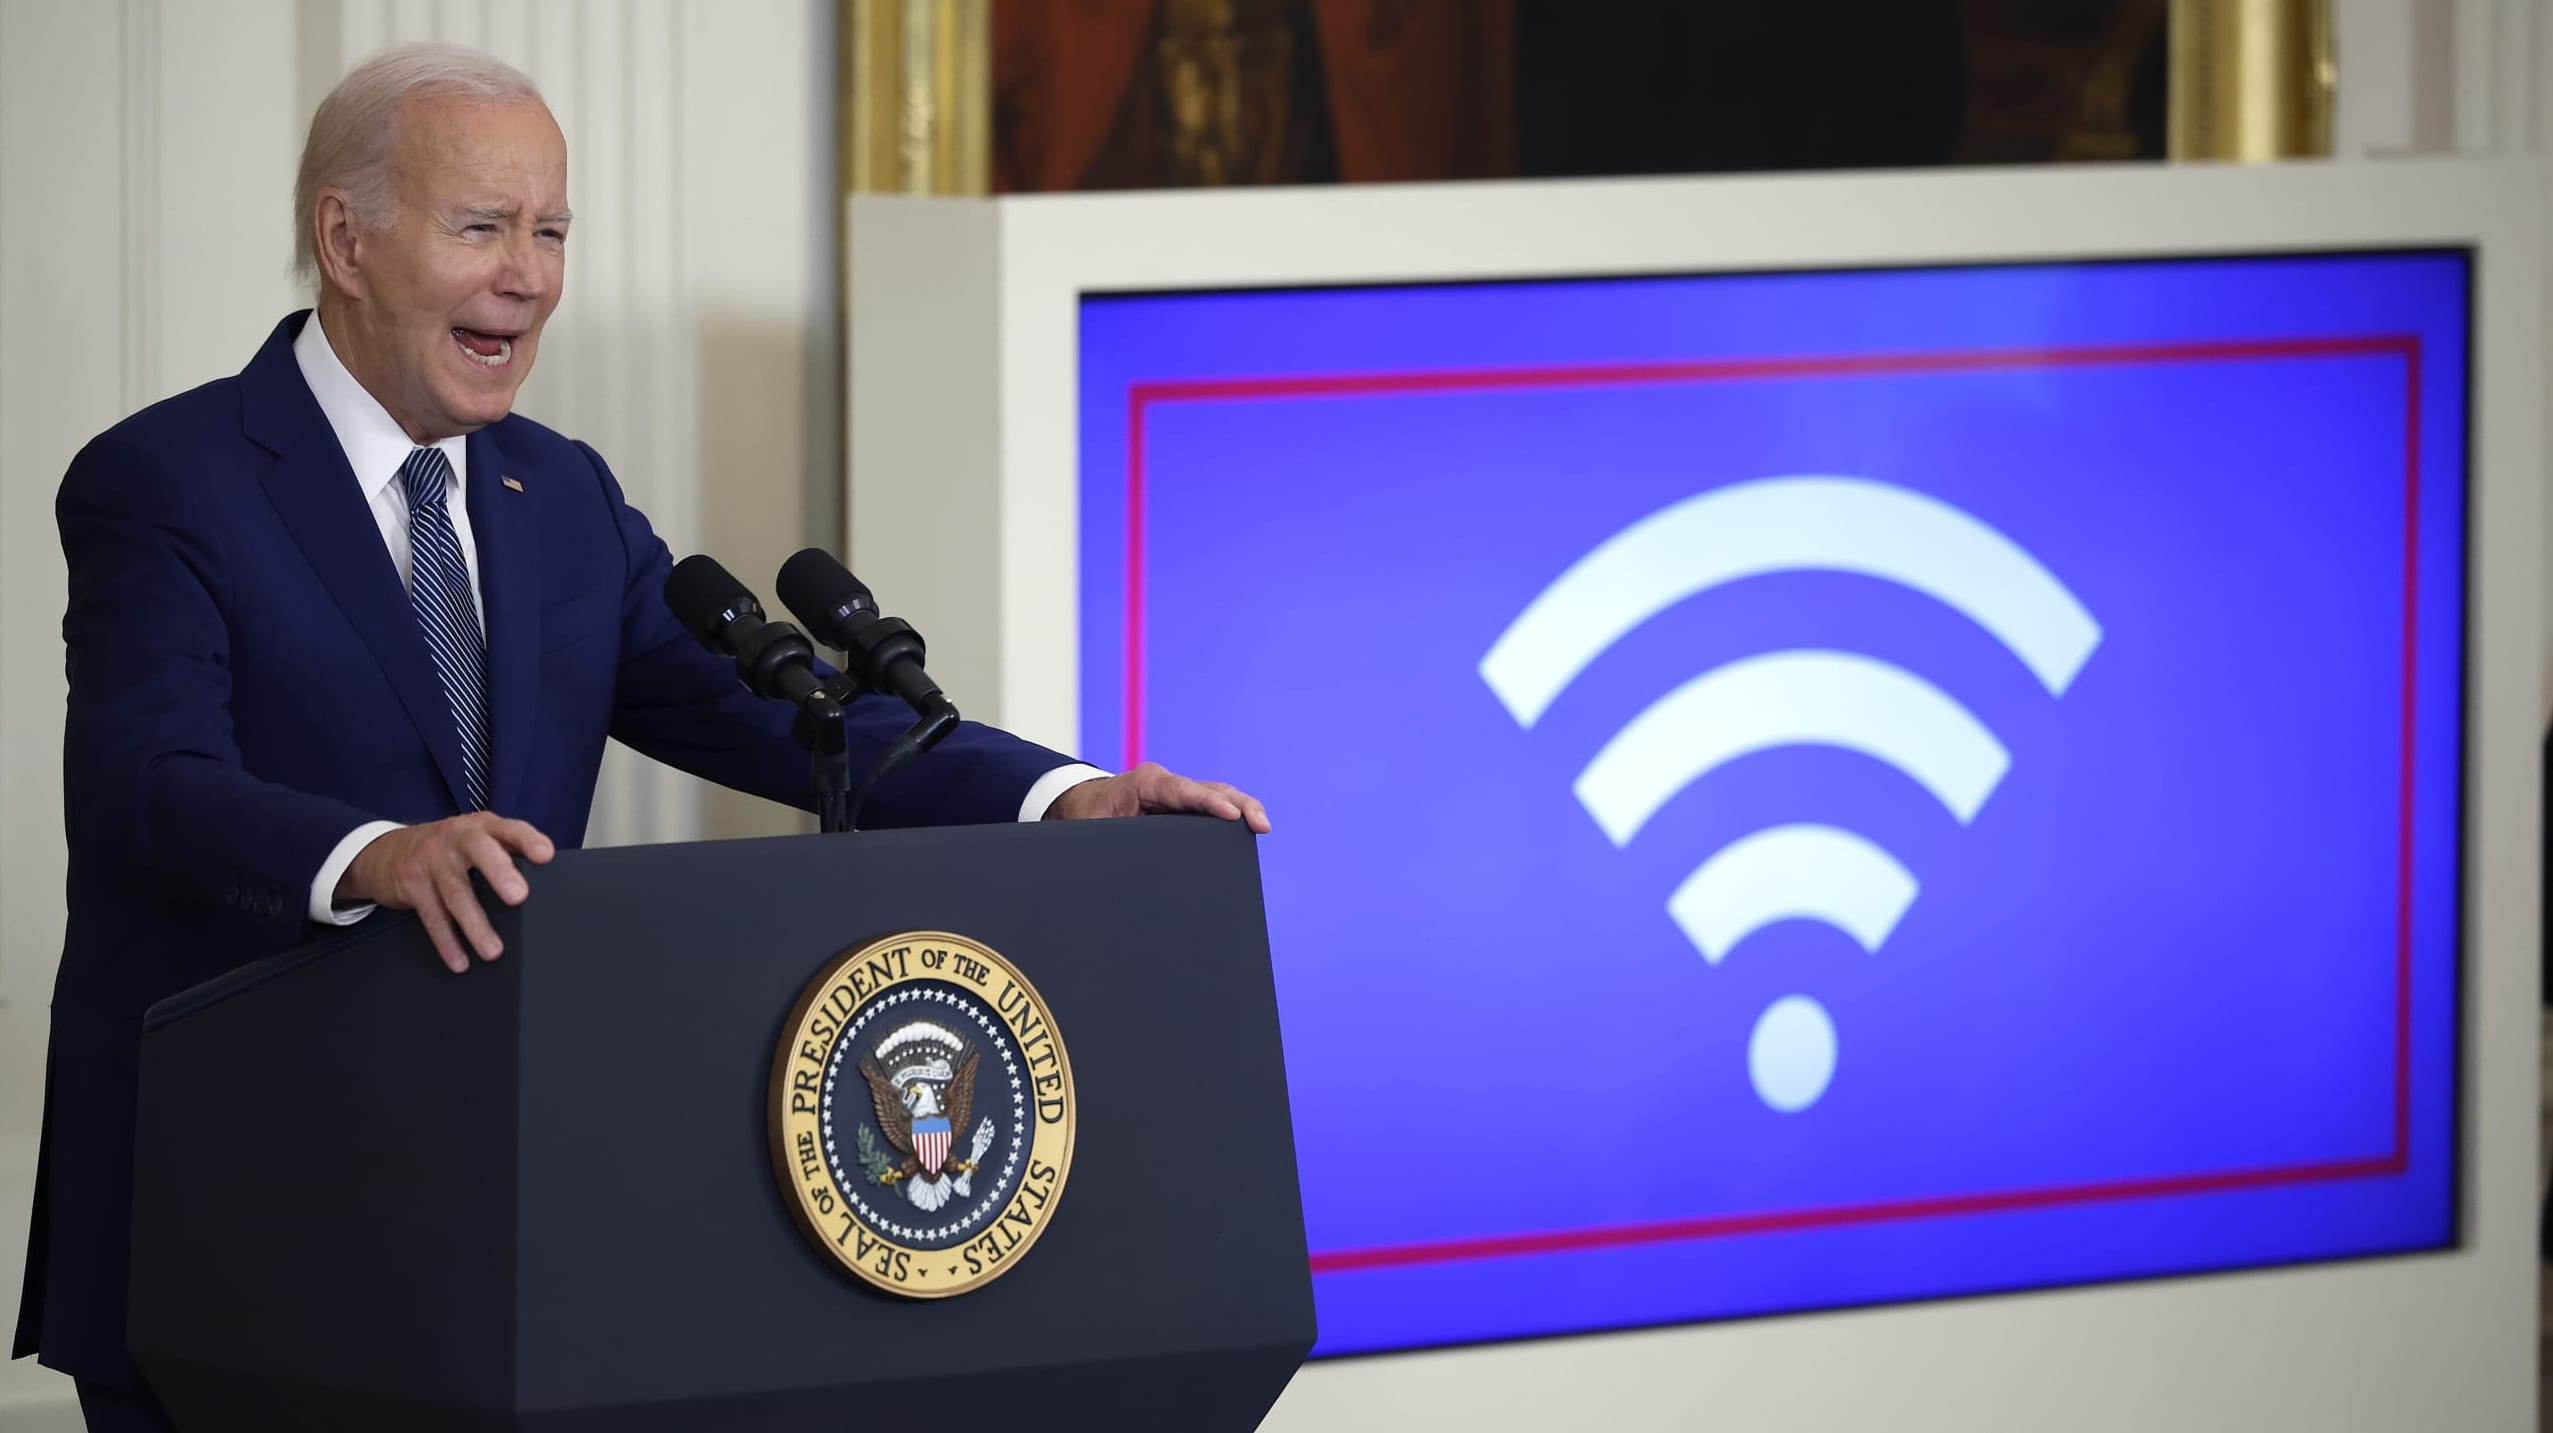 Biden announces billions of dollars to connect underserved communities to high-speed internet